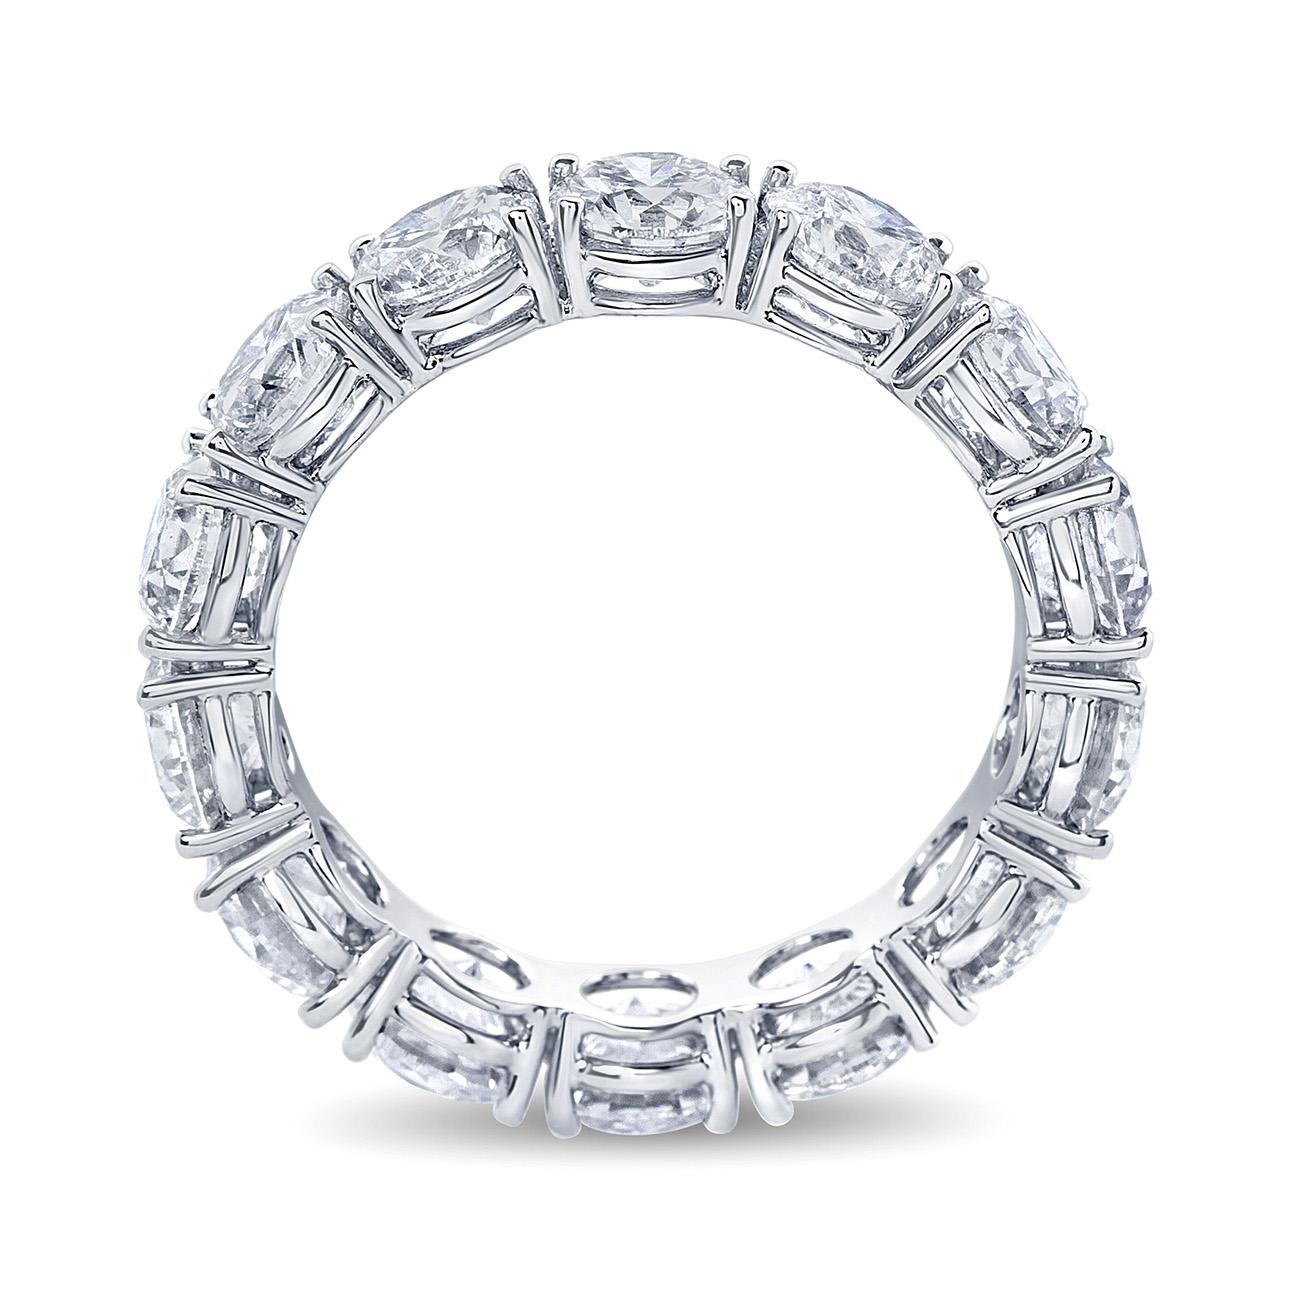 Exquisite eternity band hand crafted in 18k gold with each one of the 14 diamonds weighing over .30 carats. The Diamonds are G-H color, SI clarity with a 4.13 total carat weight.
These beautiful Diamonds are mounted in a shared prong setting, thus